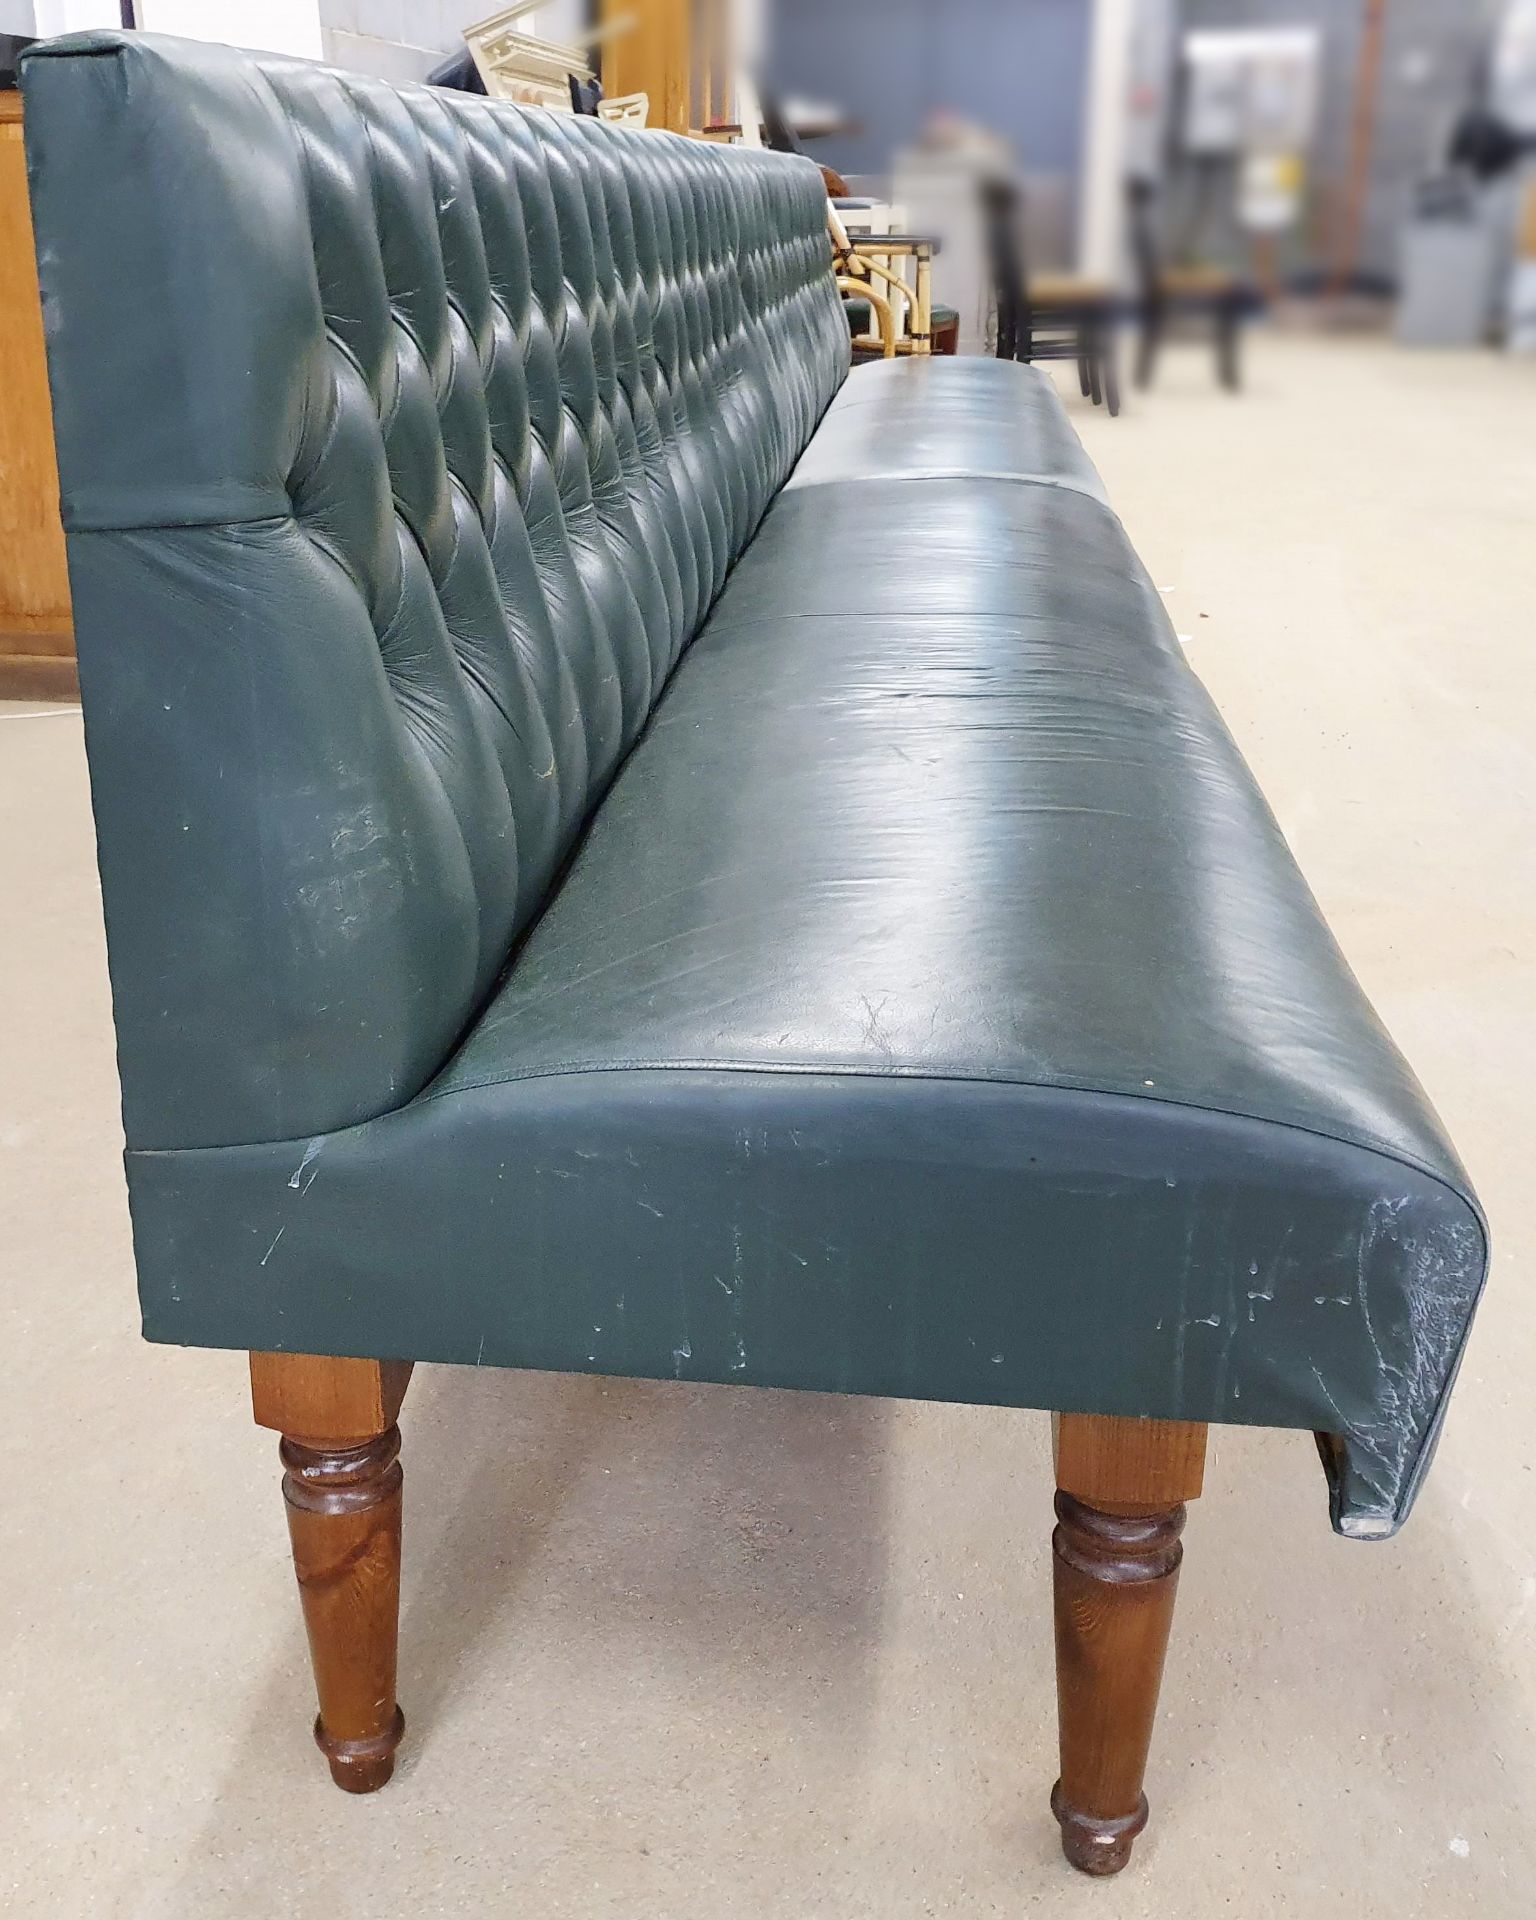 1 x Restaurant Seating Bench Upholstery in Green With Studded Back and Oak Turned Legs - H91 - Image 2 of 10